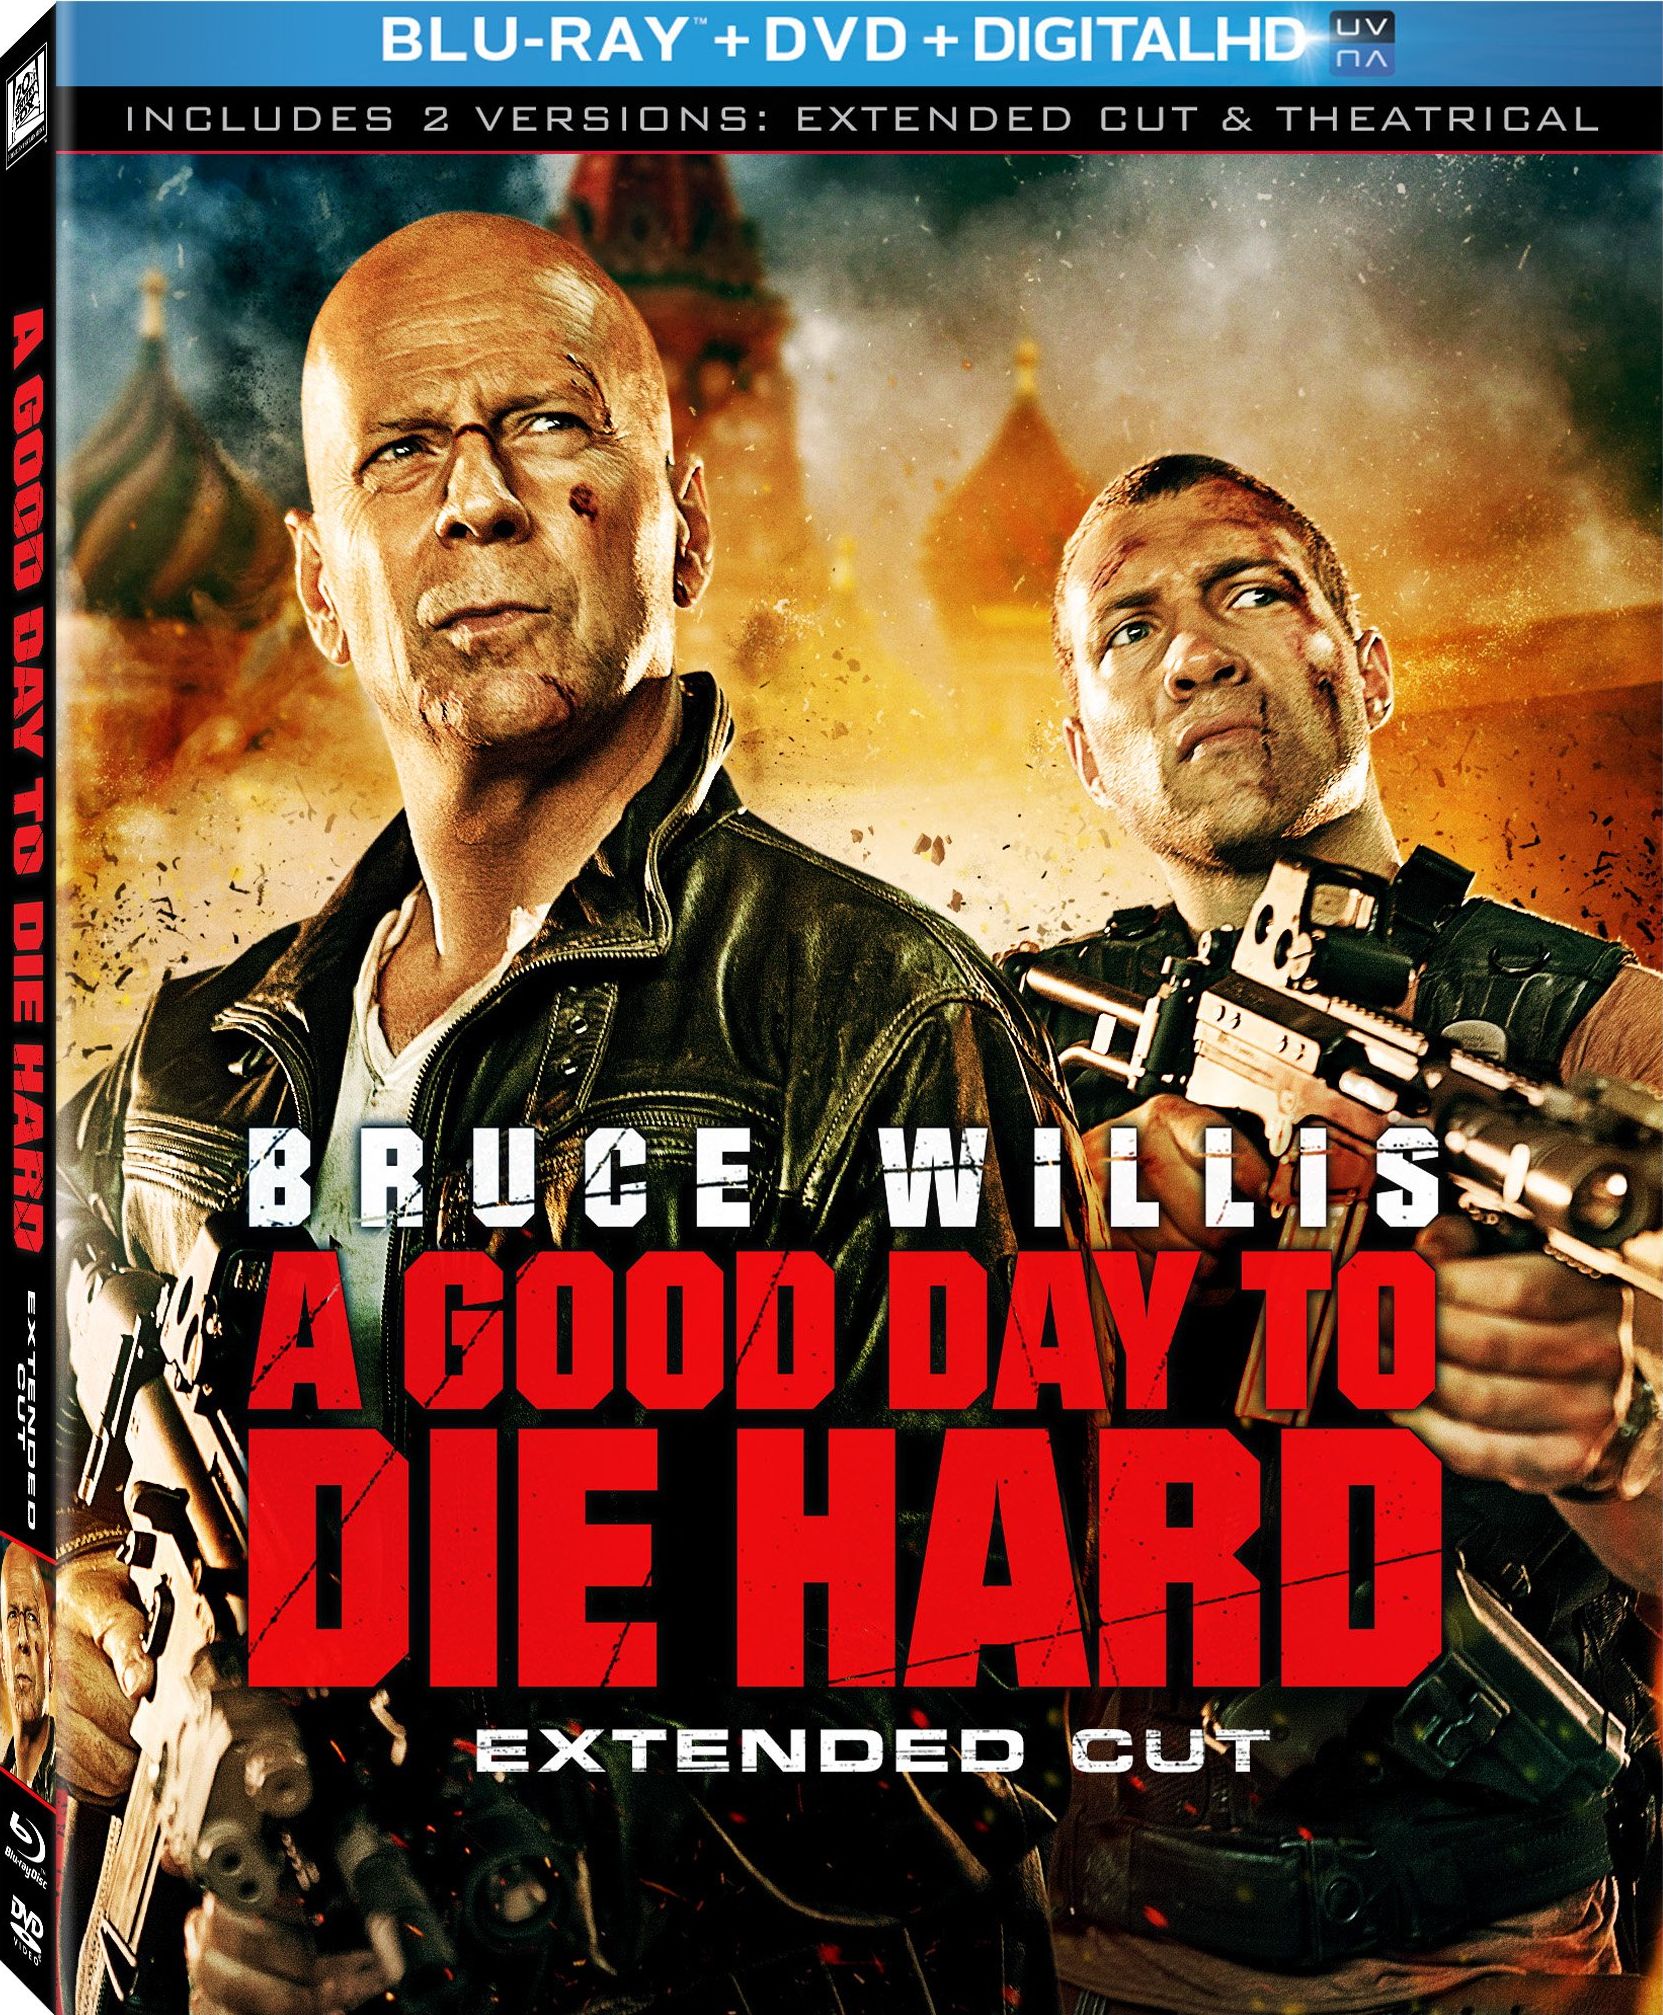 A Good Day To Die Hard #9